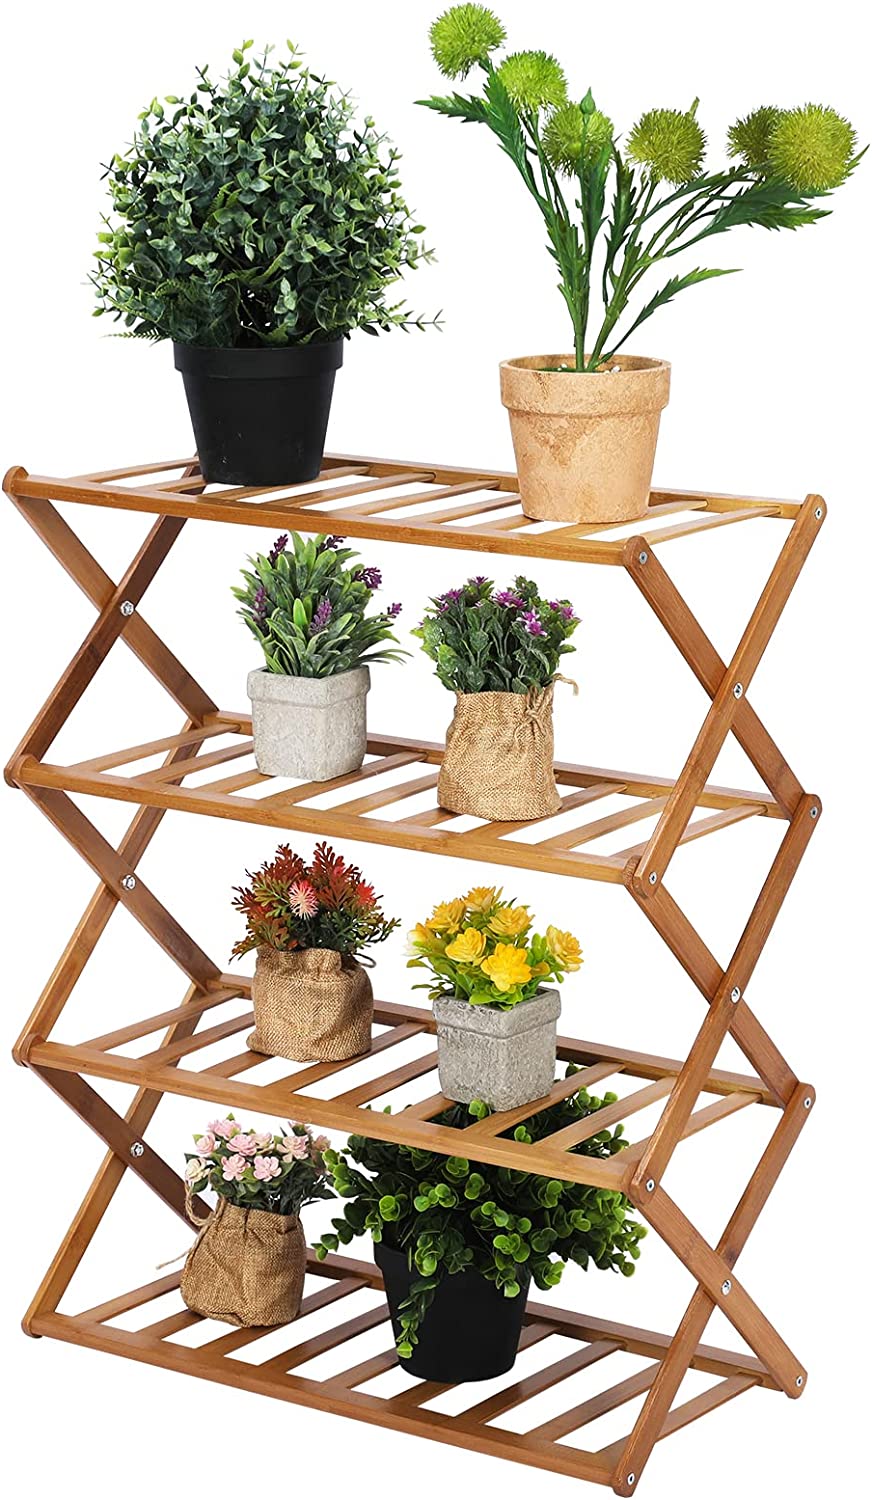 Plant Stand 4-Tier, Indoor Plant Shelf, Shoes Rack, Bamboo Flower Holder, Tiered Design Plant Rack, Plant Stands for Gardens, Balconies Plant Shelves…